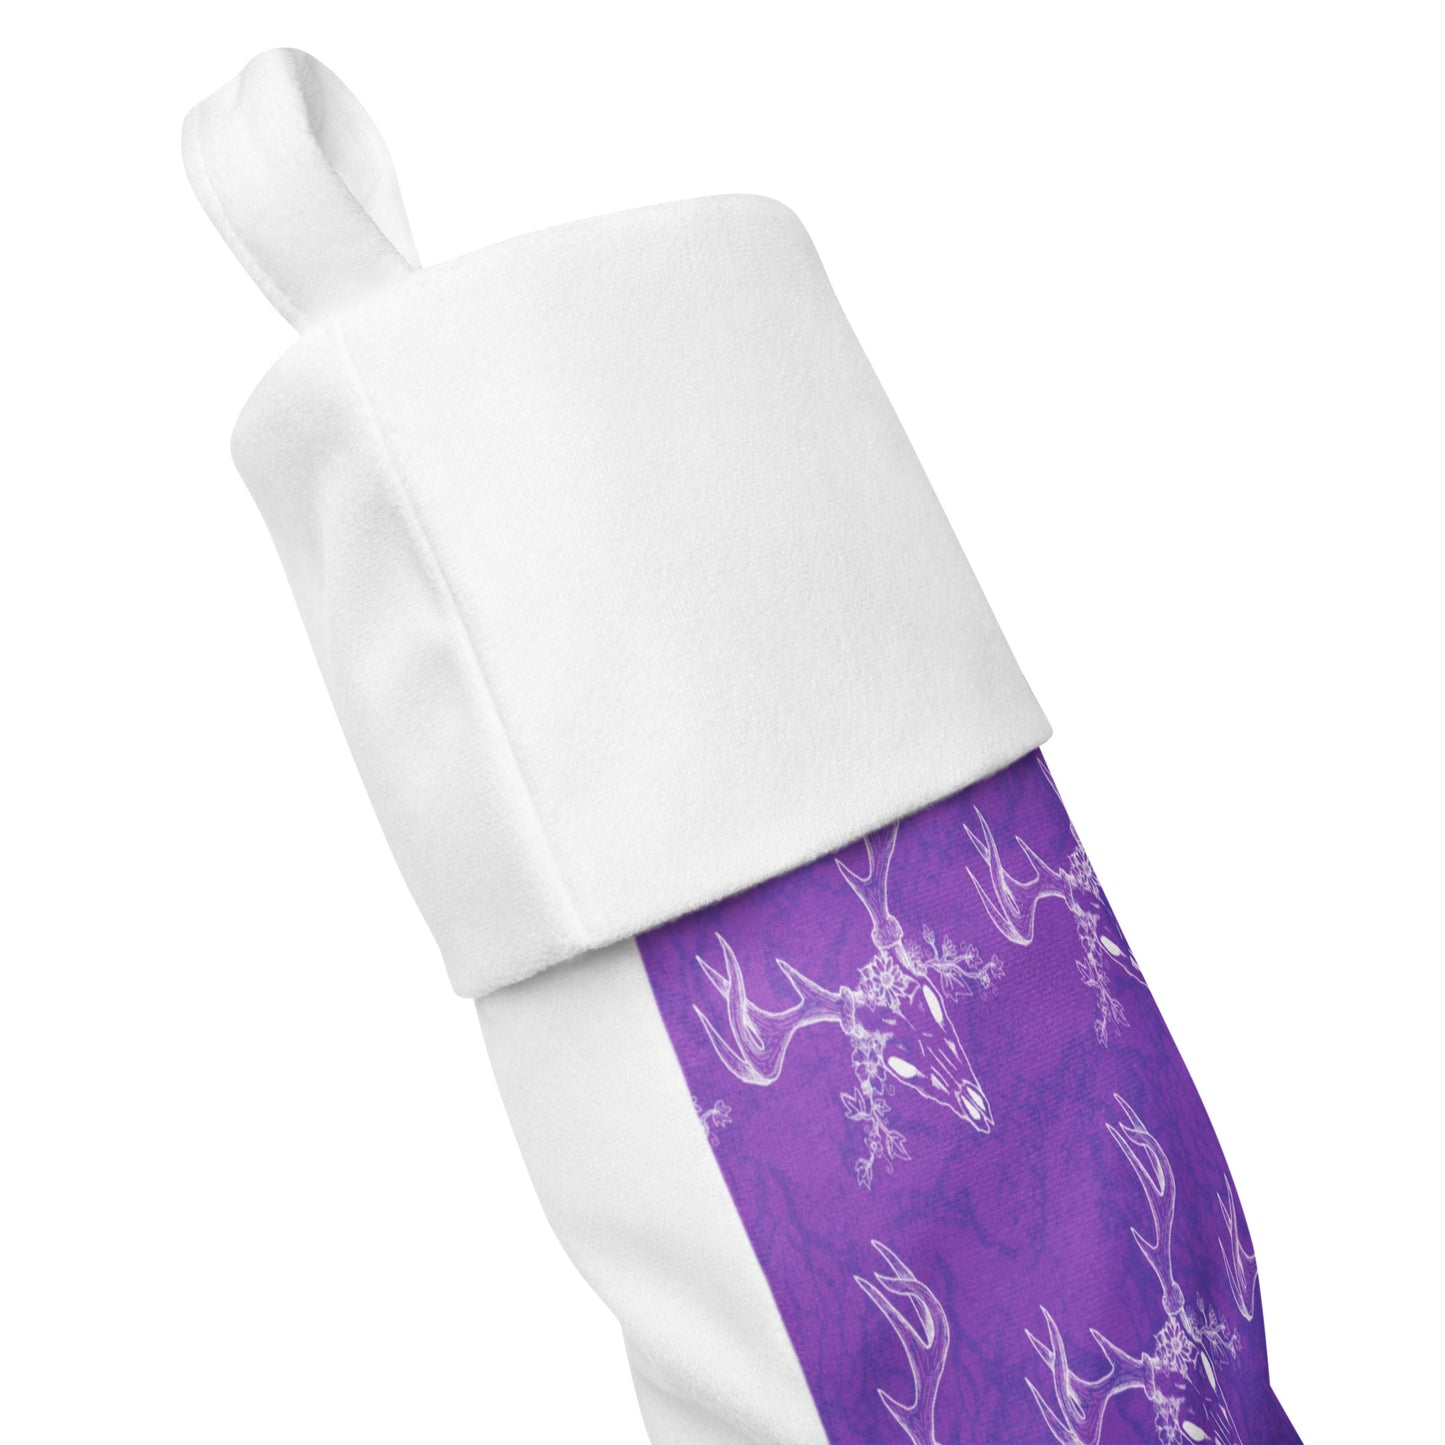 Limited Edition Purple Deer Skull Christmas Stocking.  7 by 18 inches. The front has a hand-illustrated deer skull design on a purple background with an off-white polyester fabric on the back. It has a white fold-over cuff and a loop for hanging. Side view shows front and back fabric.